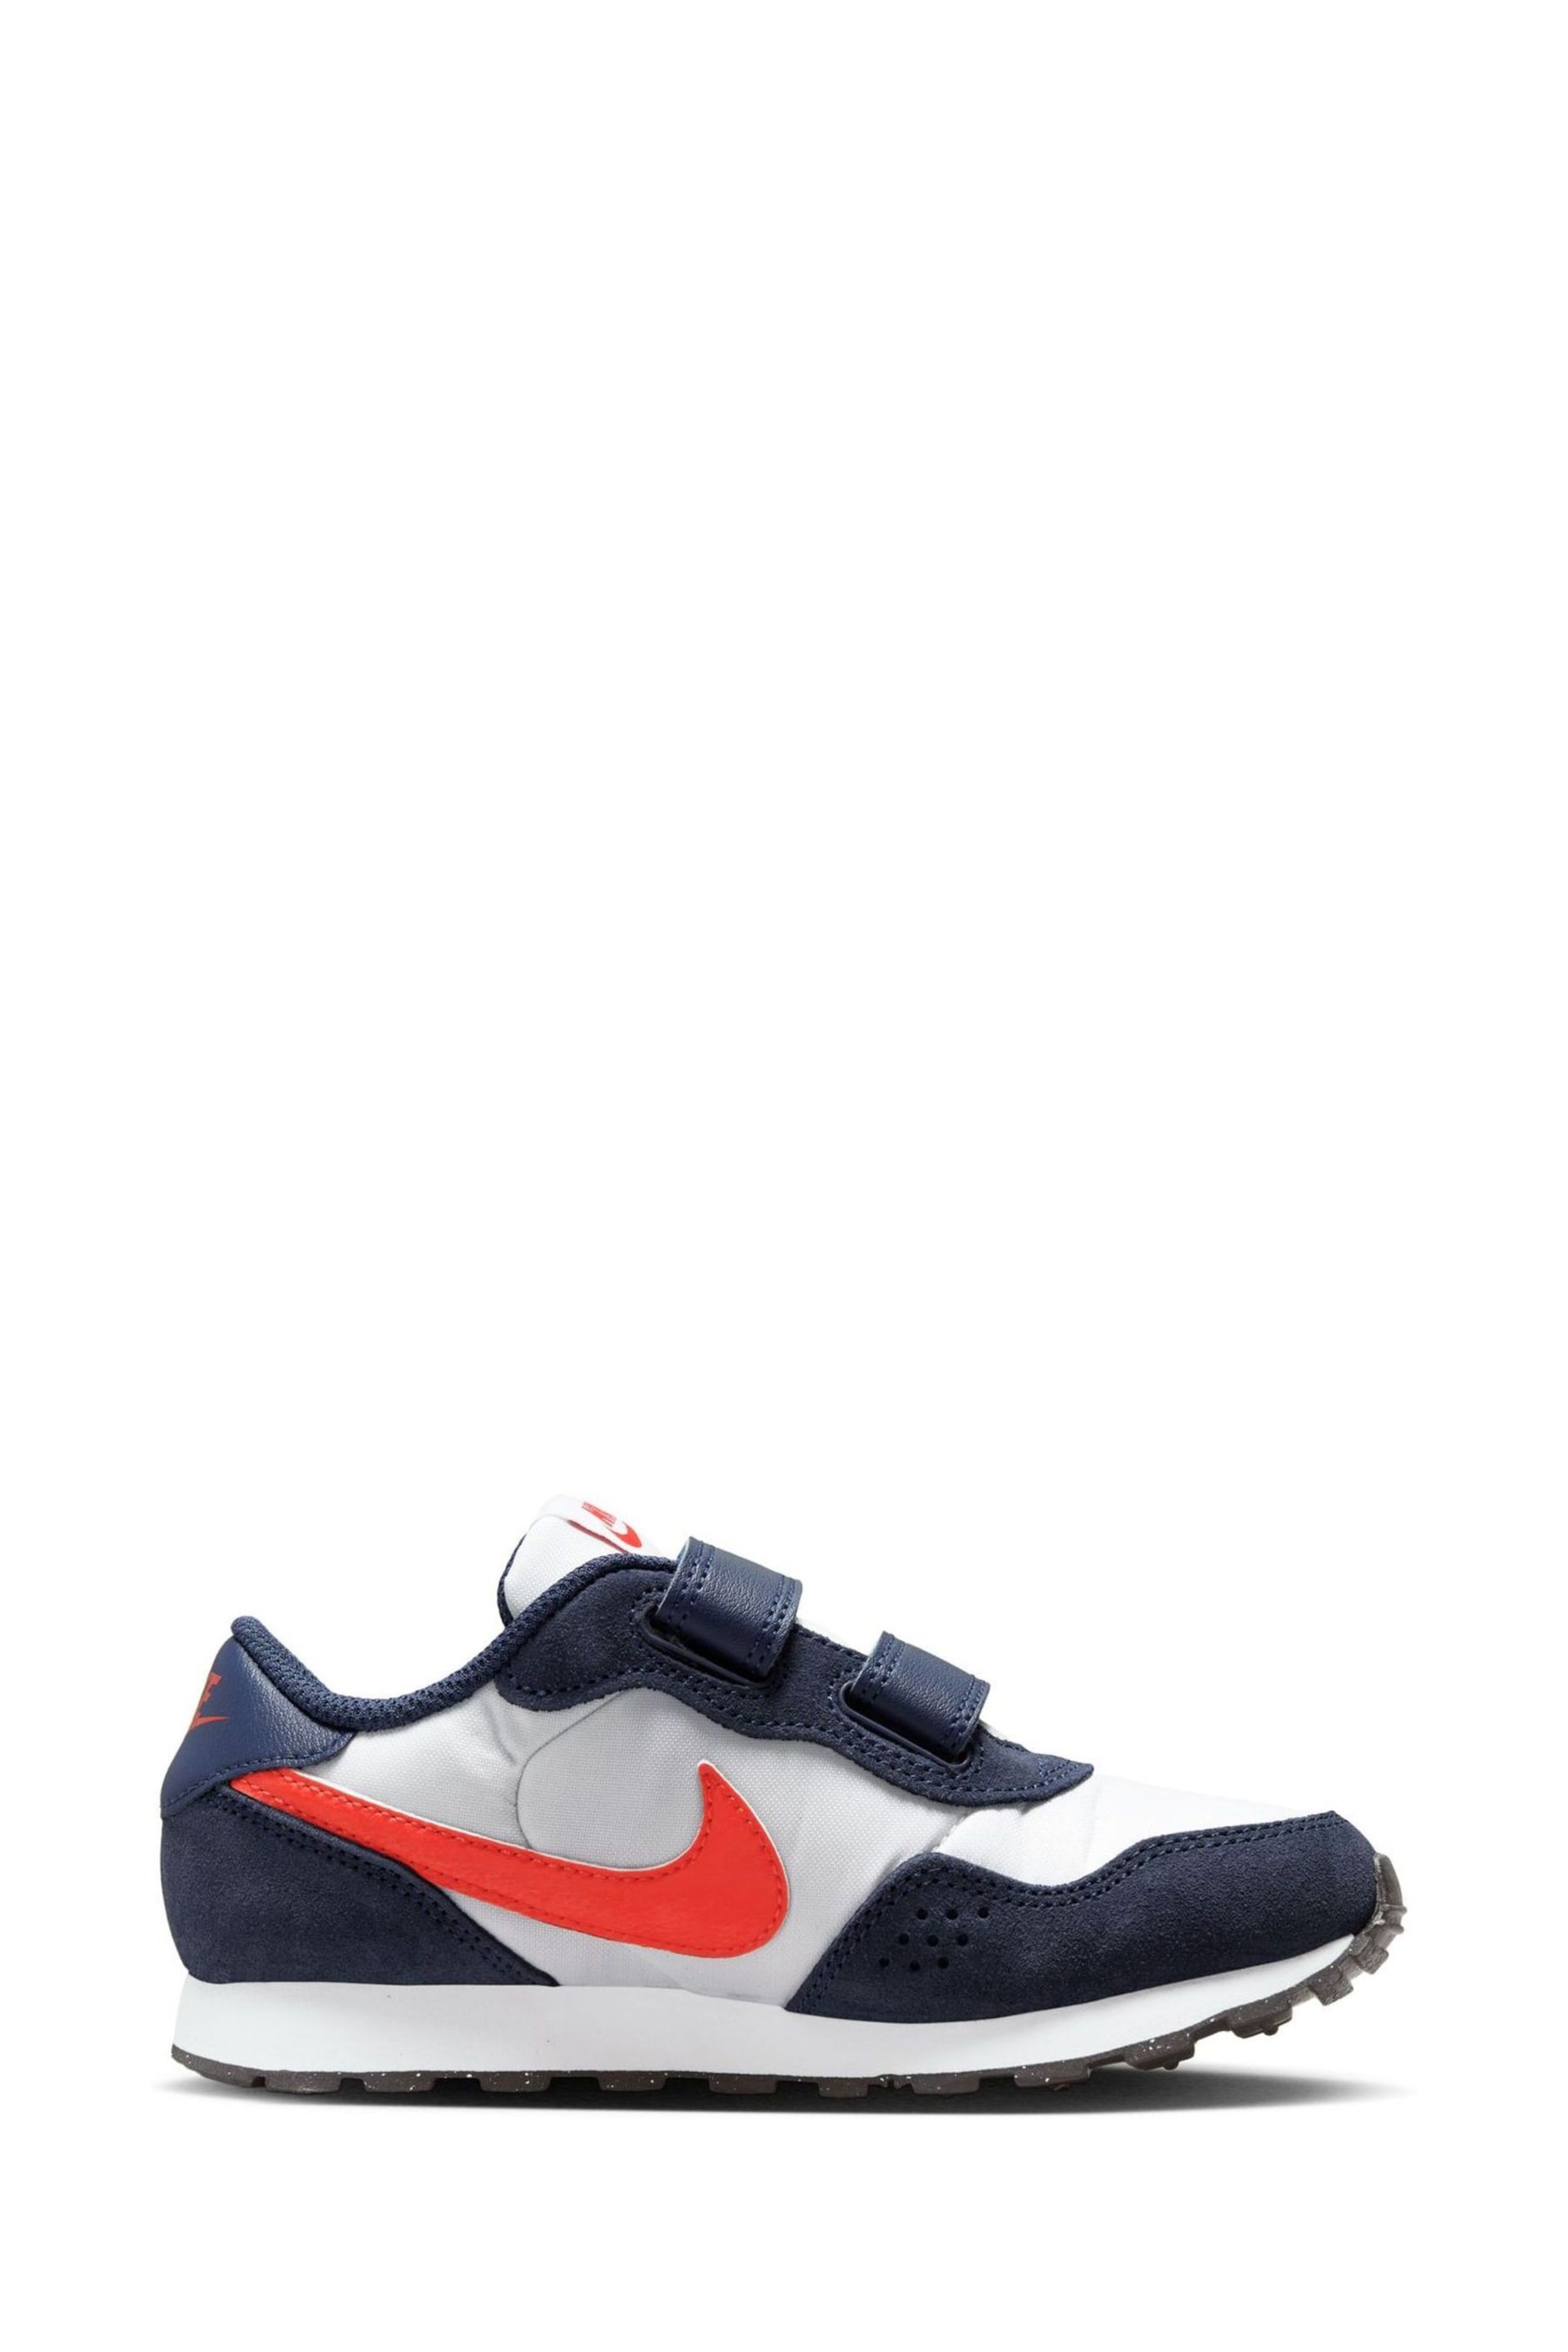 Nike Navy/White/Red Infant MD Valiant Trainers - Image 3 of 10